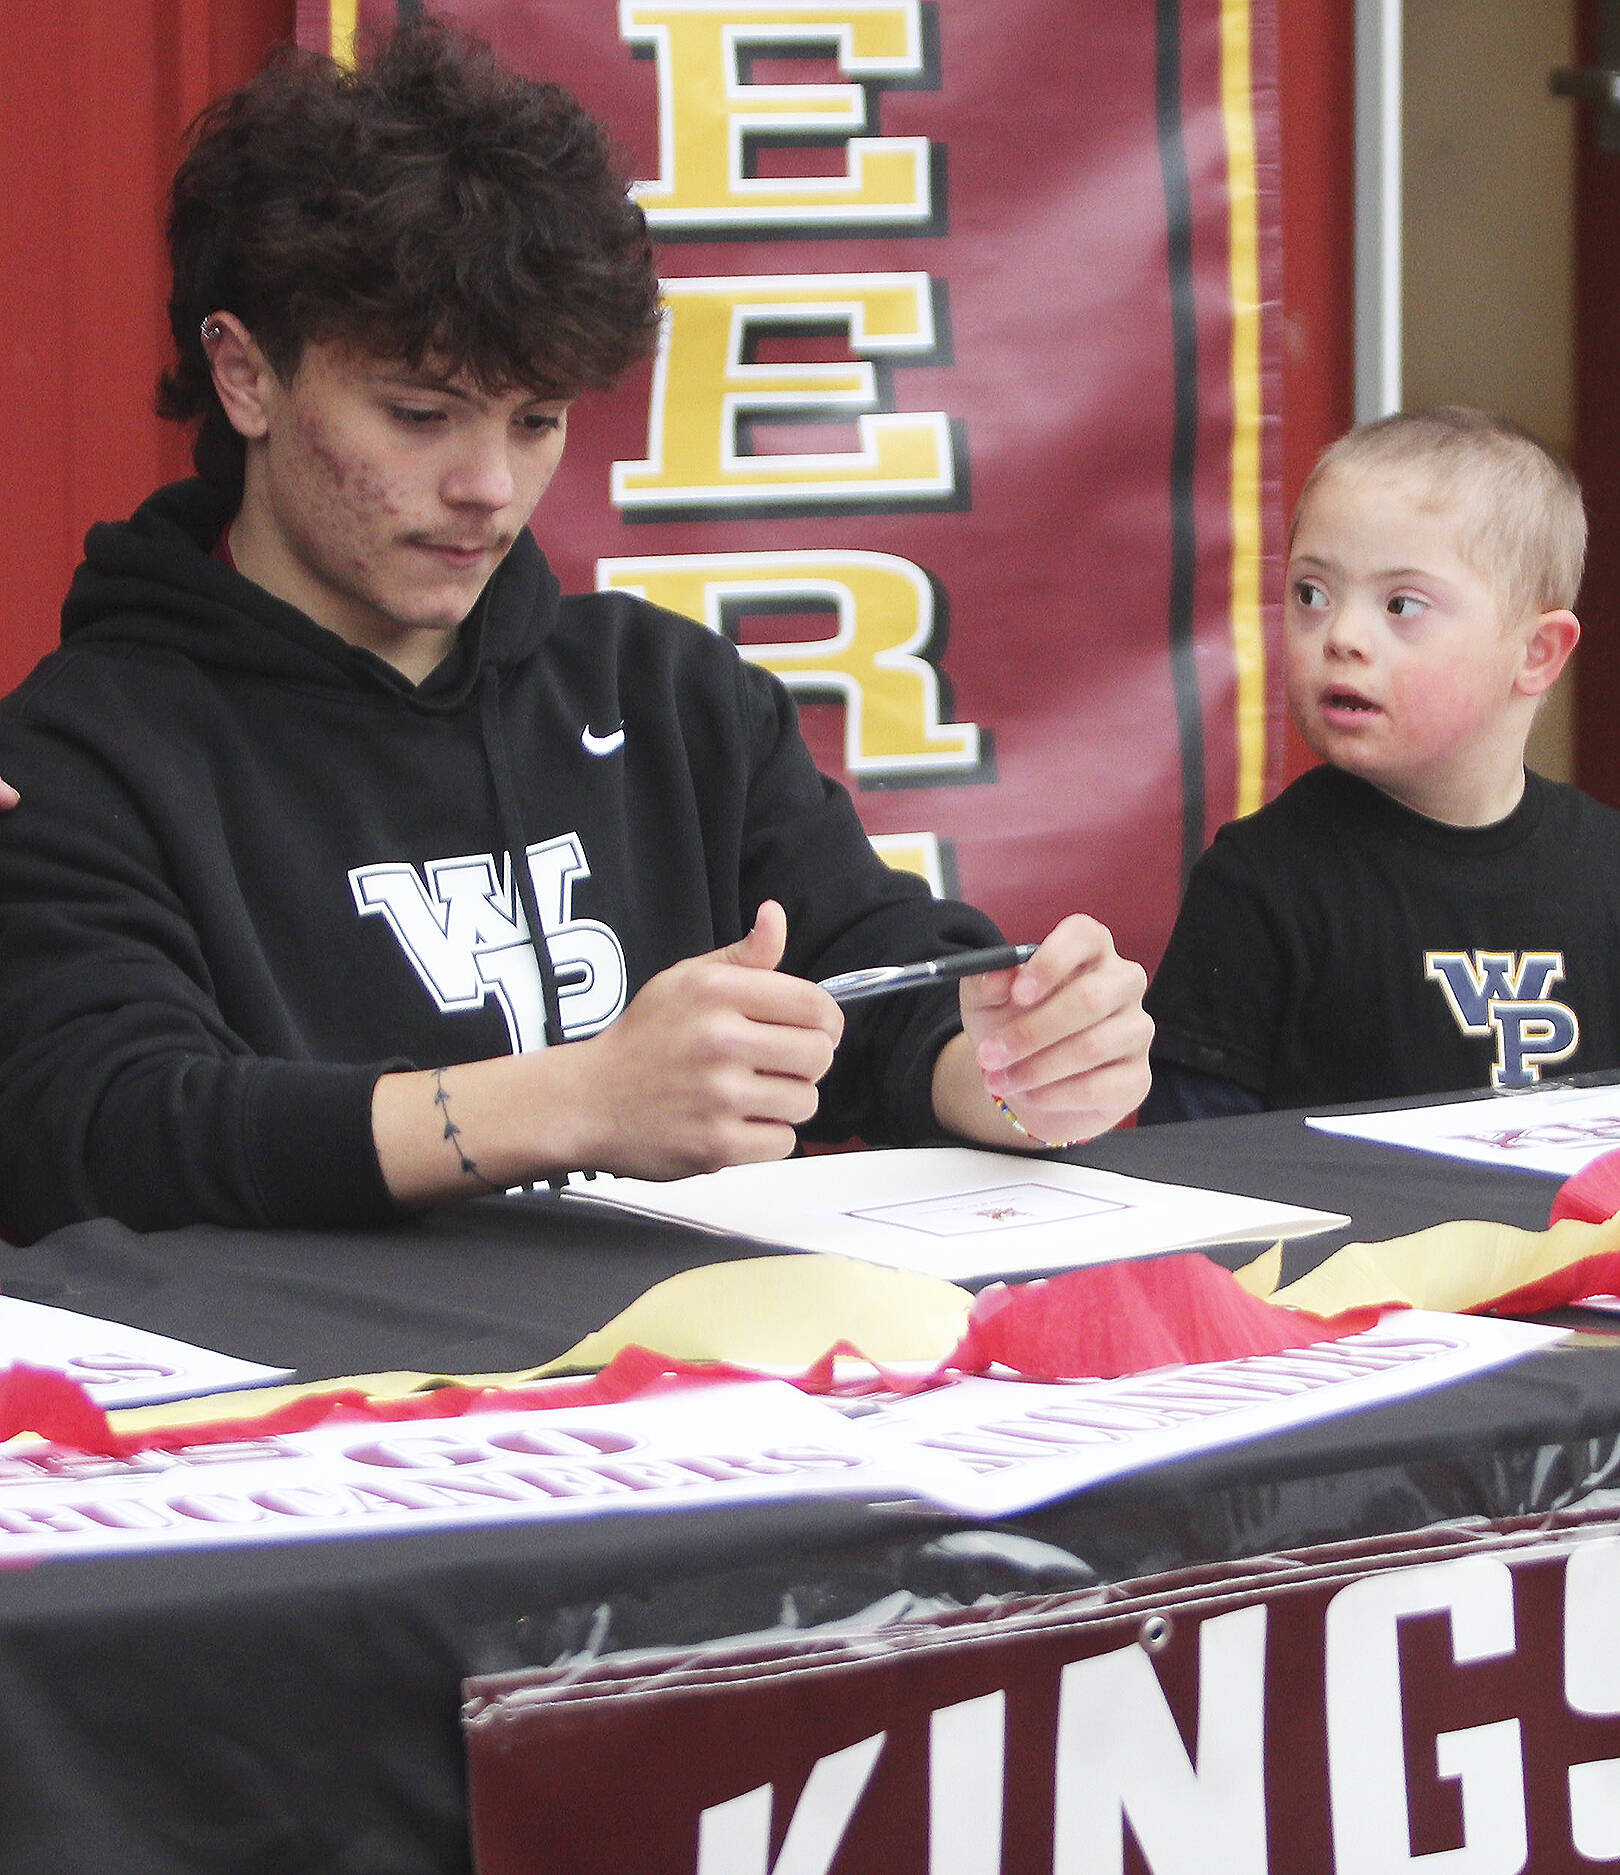 Kaden Schaefer of Kingston signs a letter of intent to play college soccer, while brother Zander, 5, looks on with admiration. Steve Powell/North Kitsap Herald photos